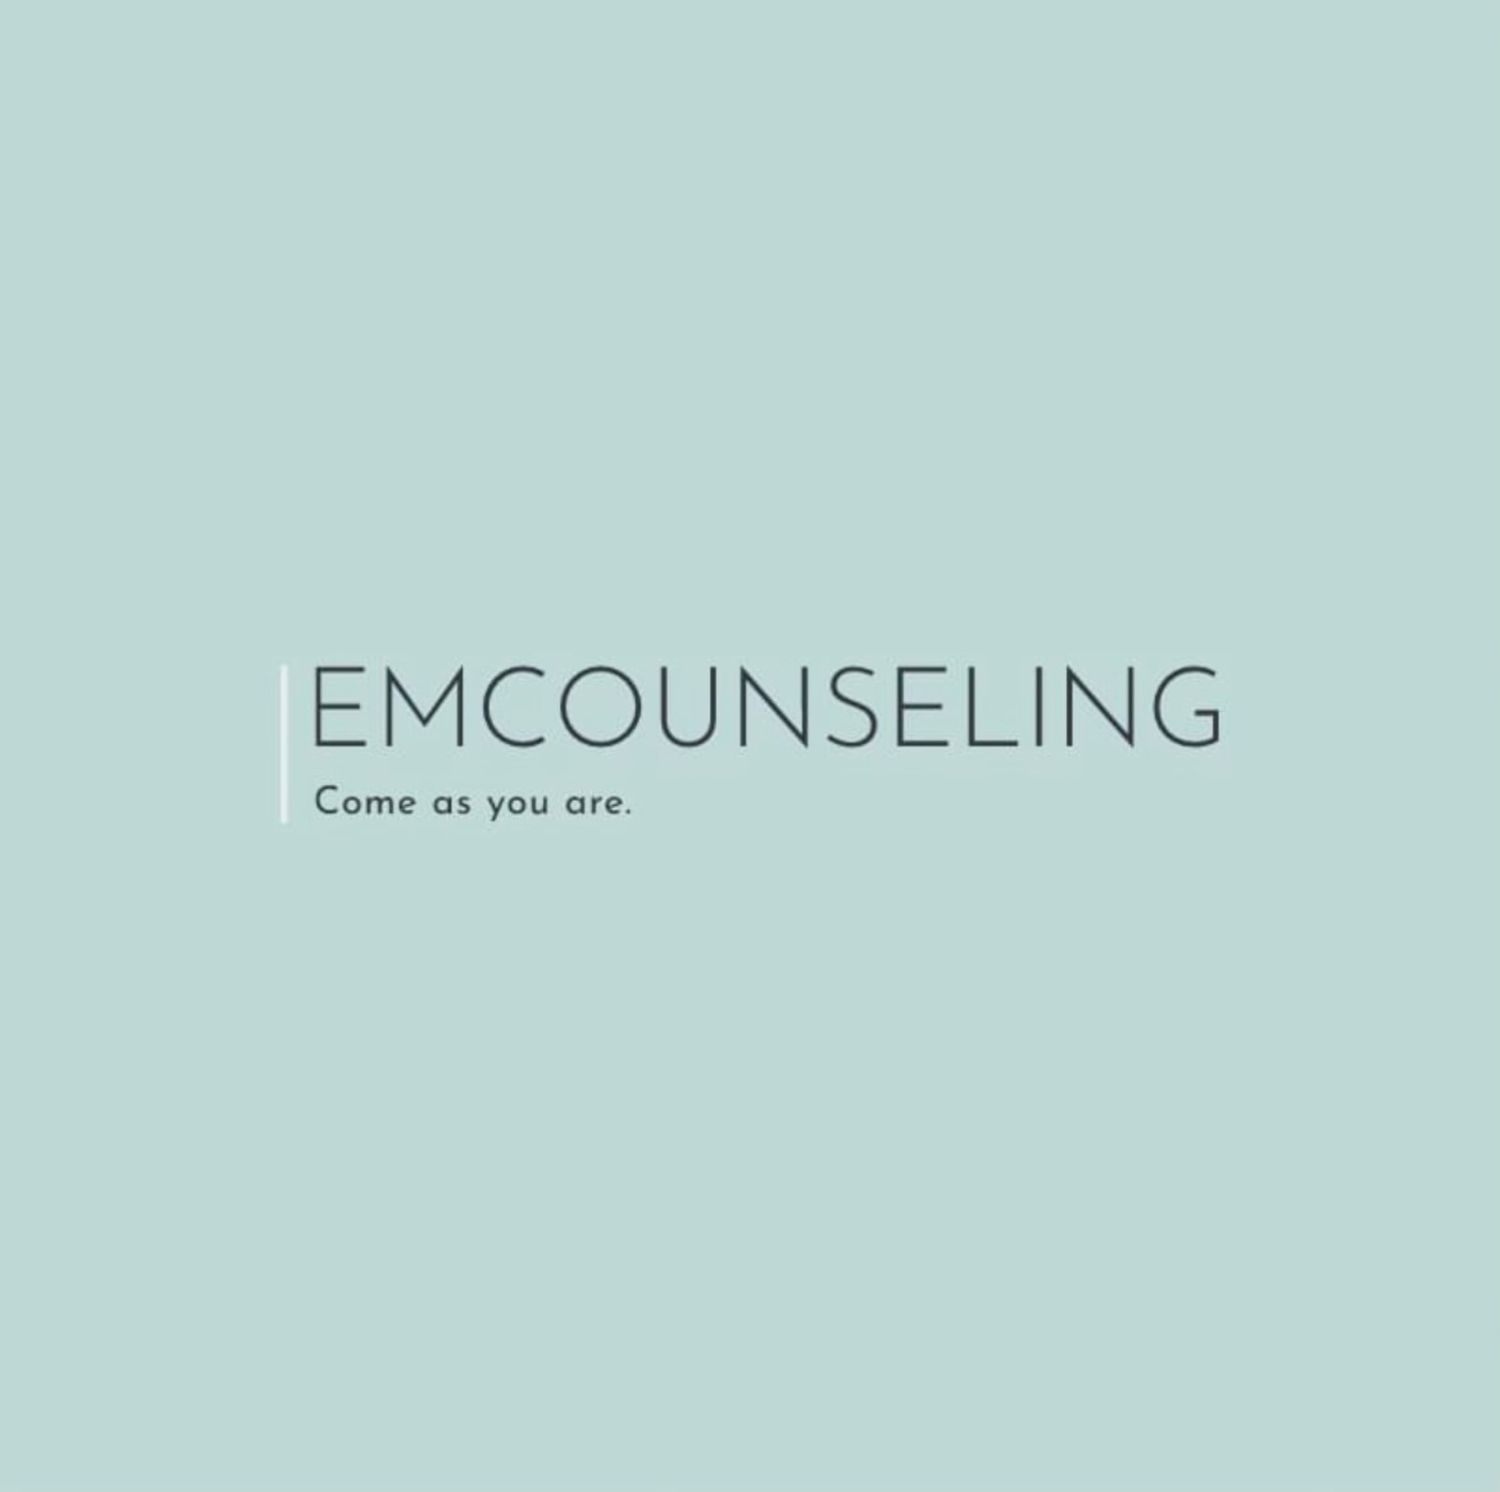 Gallery Photo of EMCounseling Logo